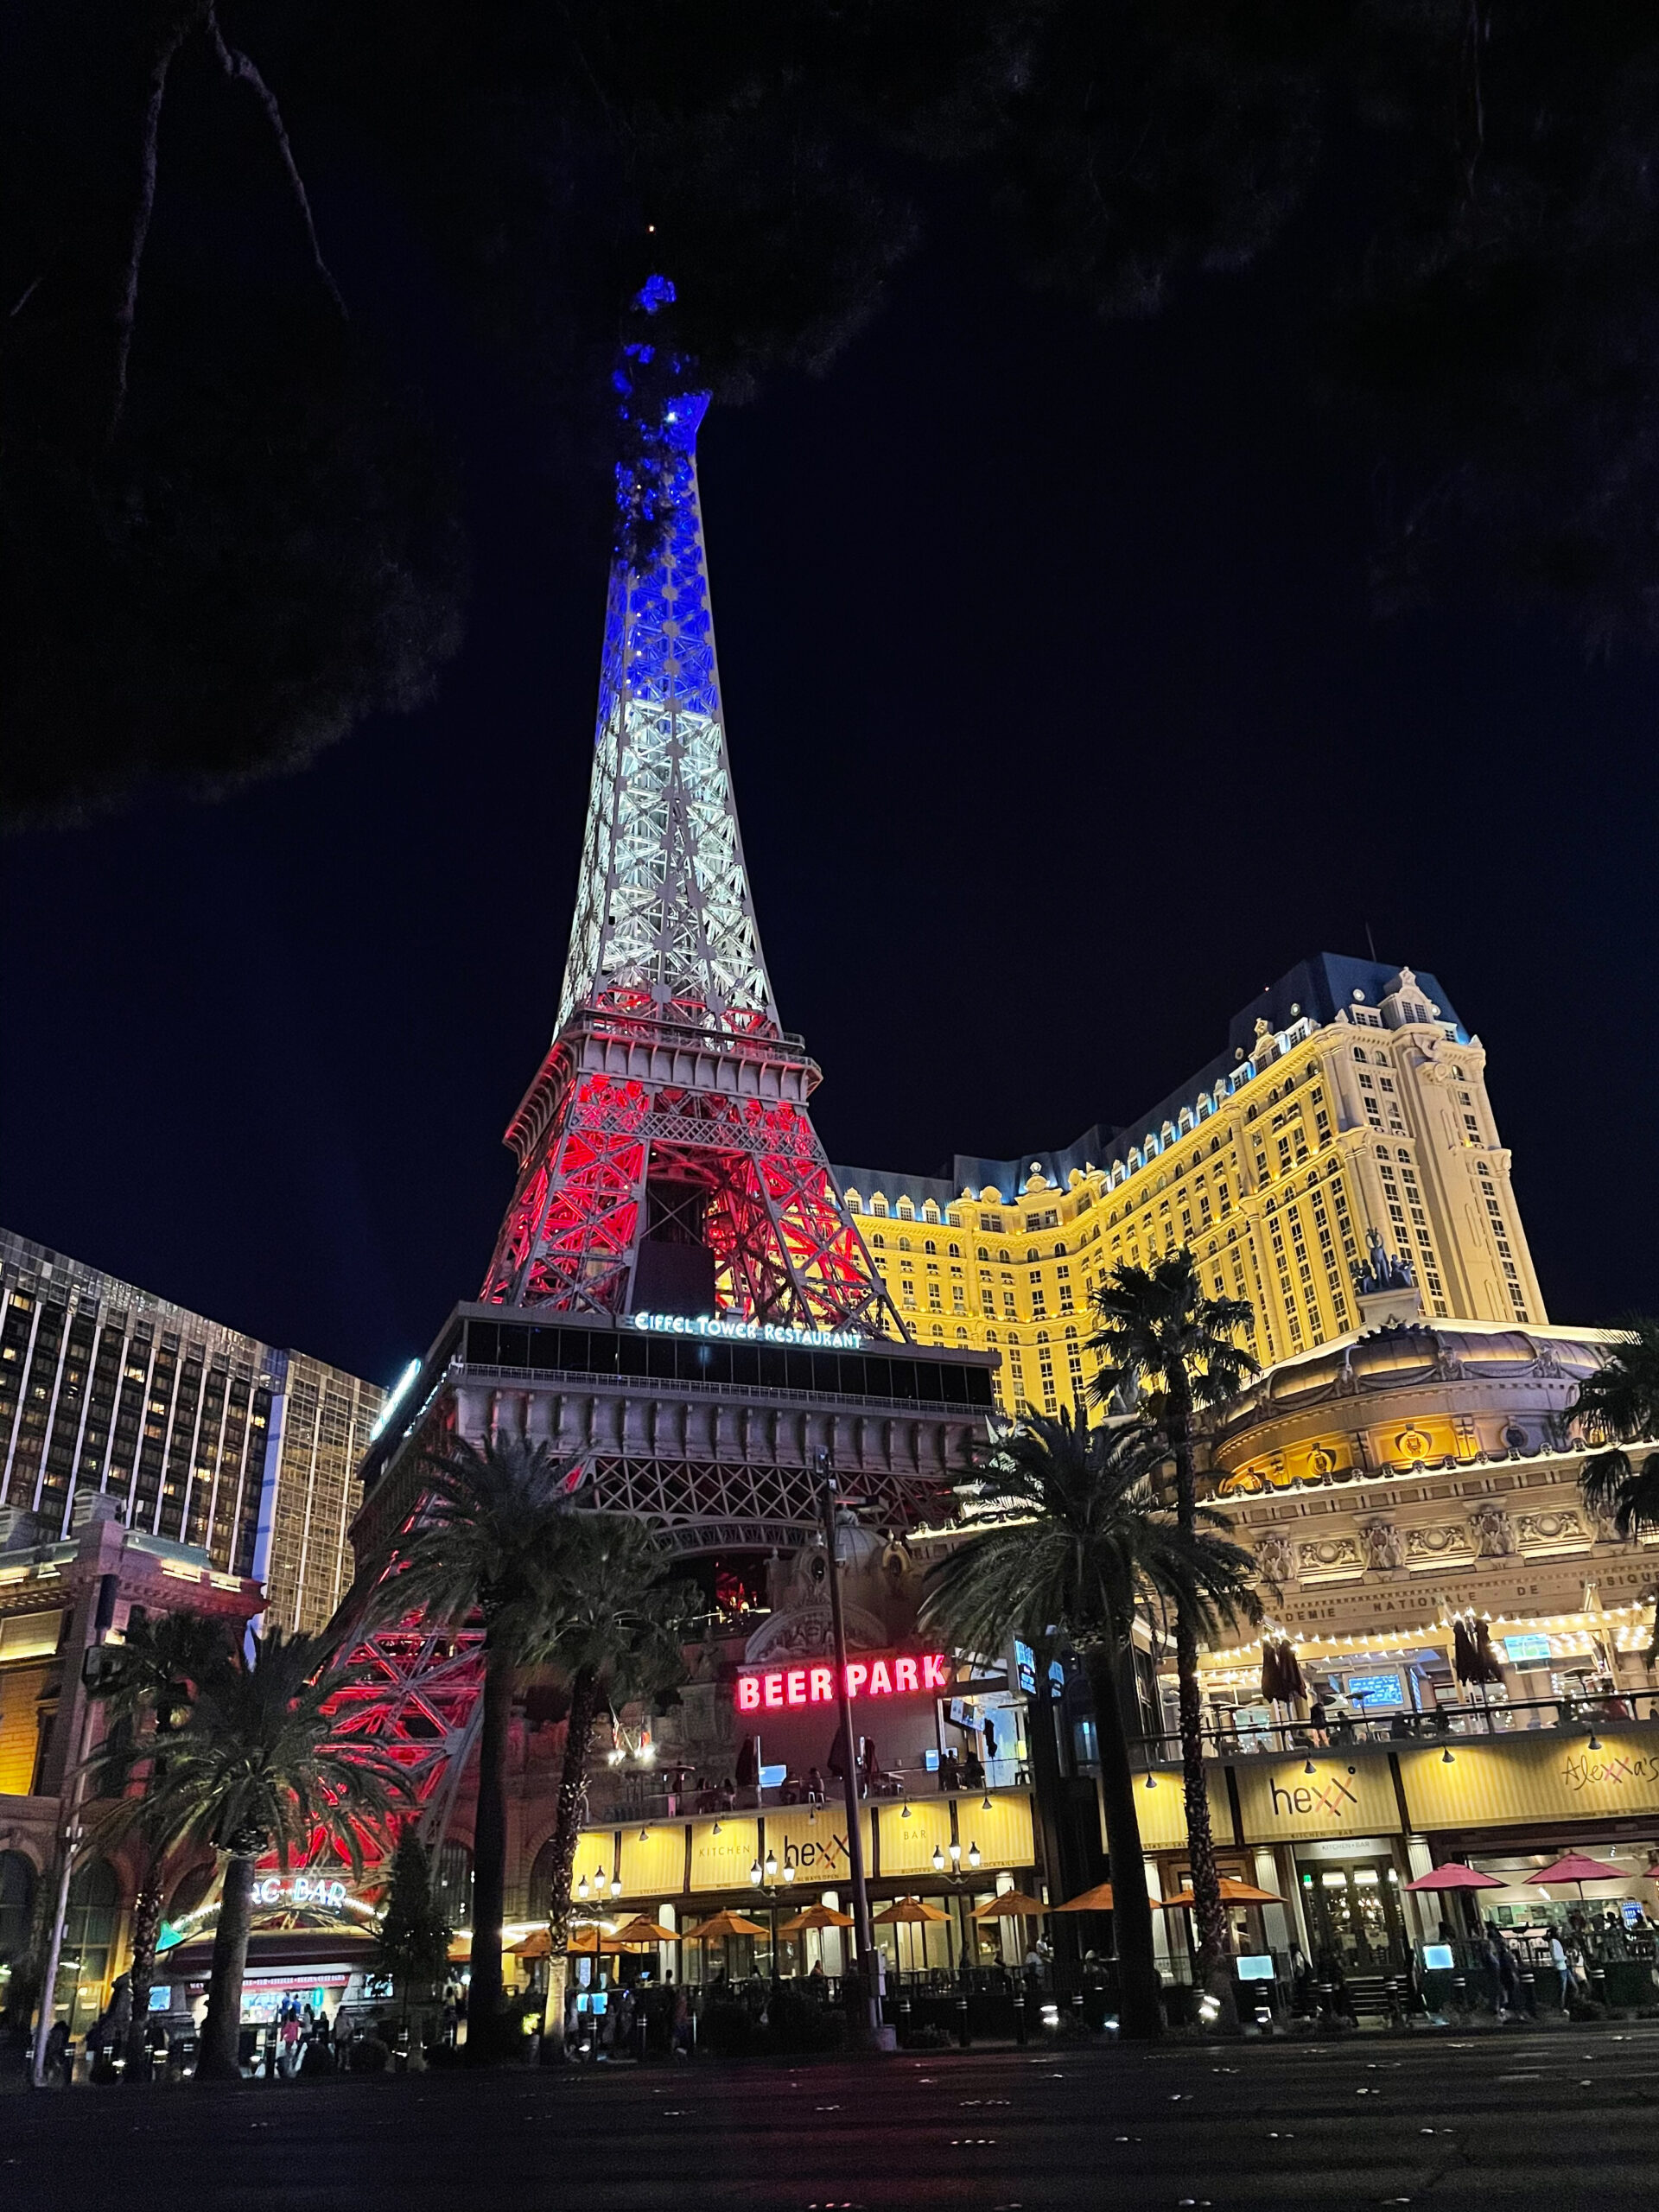 Las Vegas Paris Hotel Lit Up at Night in Red, White and Blue